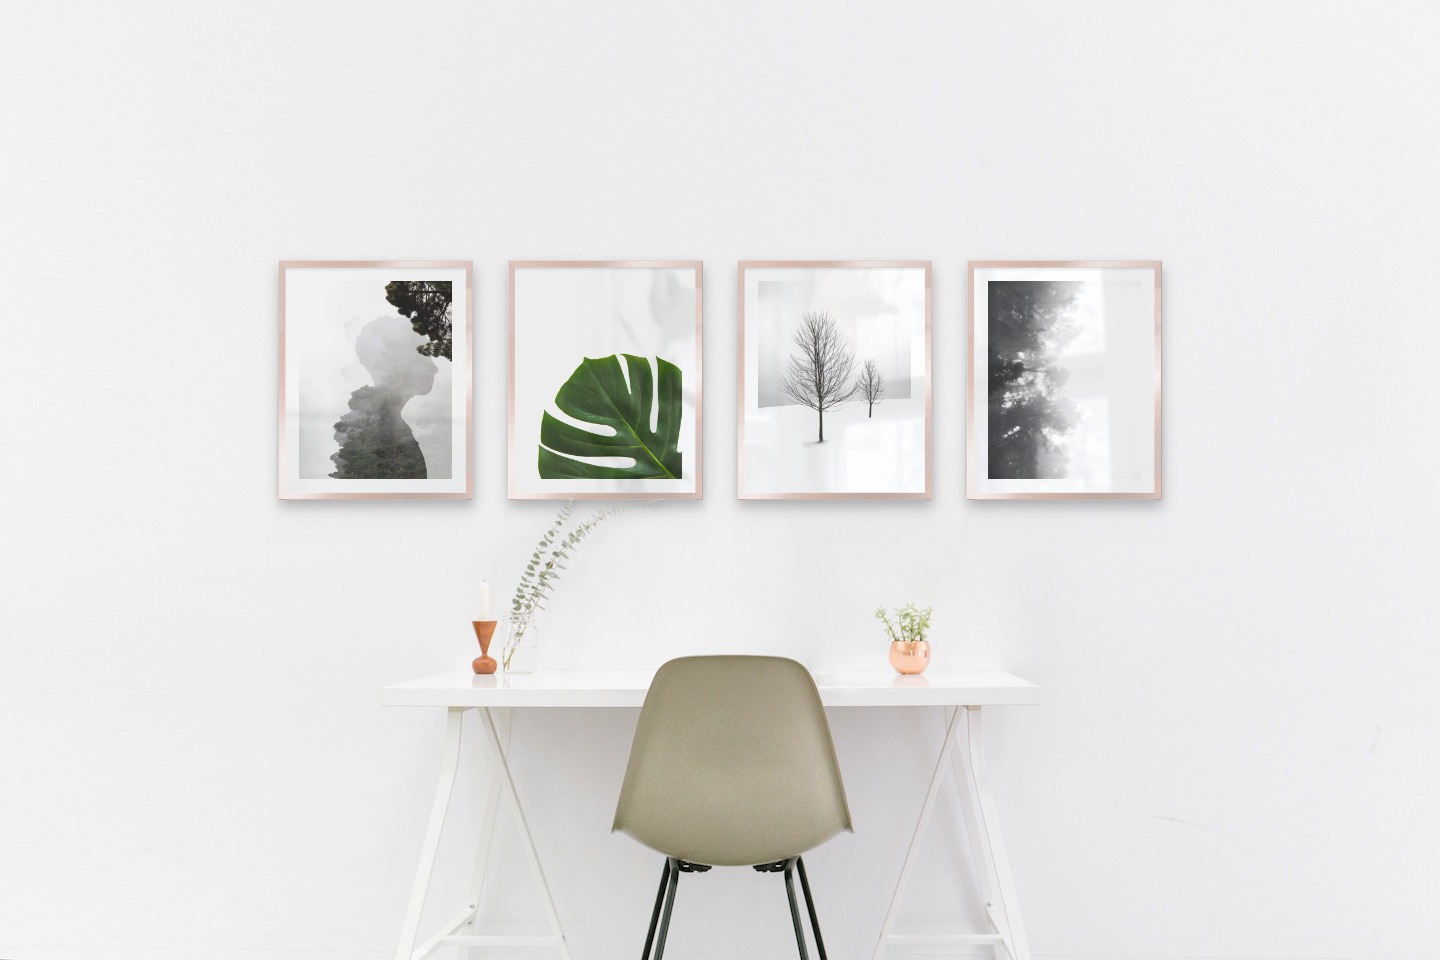 Gallery wall with picture frames in copper in sizes 40x50 with prints "Silhouette and tree", "Plant", "Trees in the snow" and "Foggy wooden tops from the side"